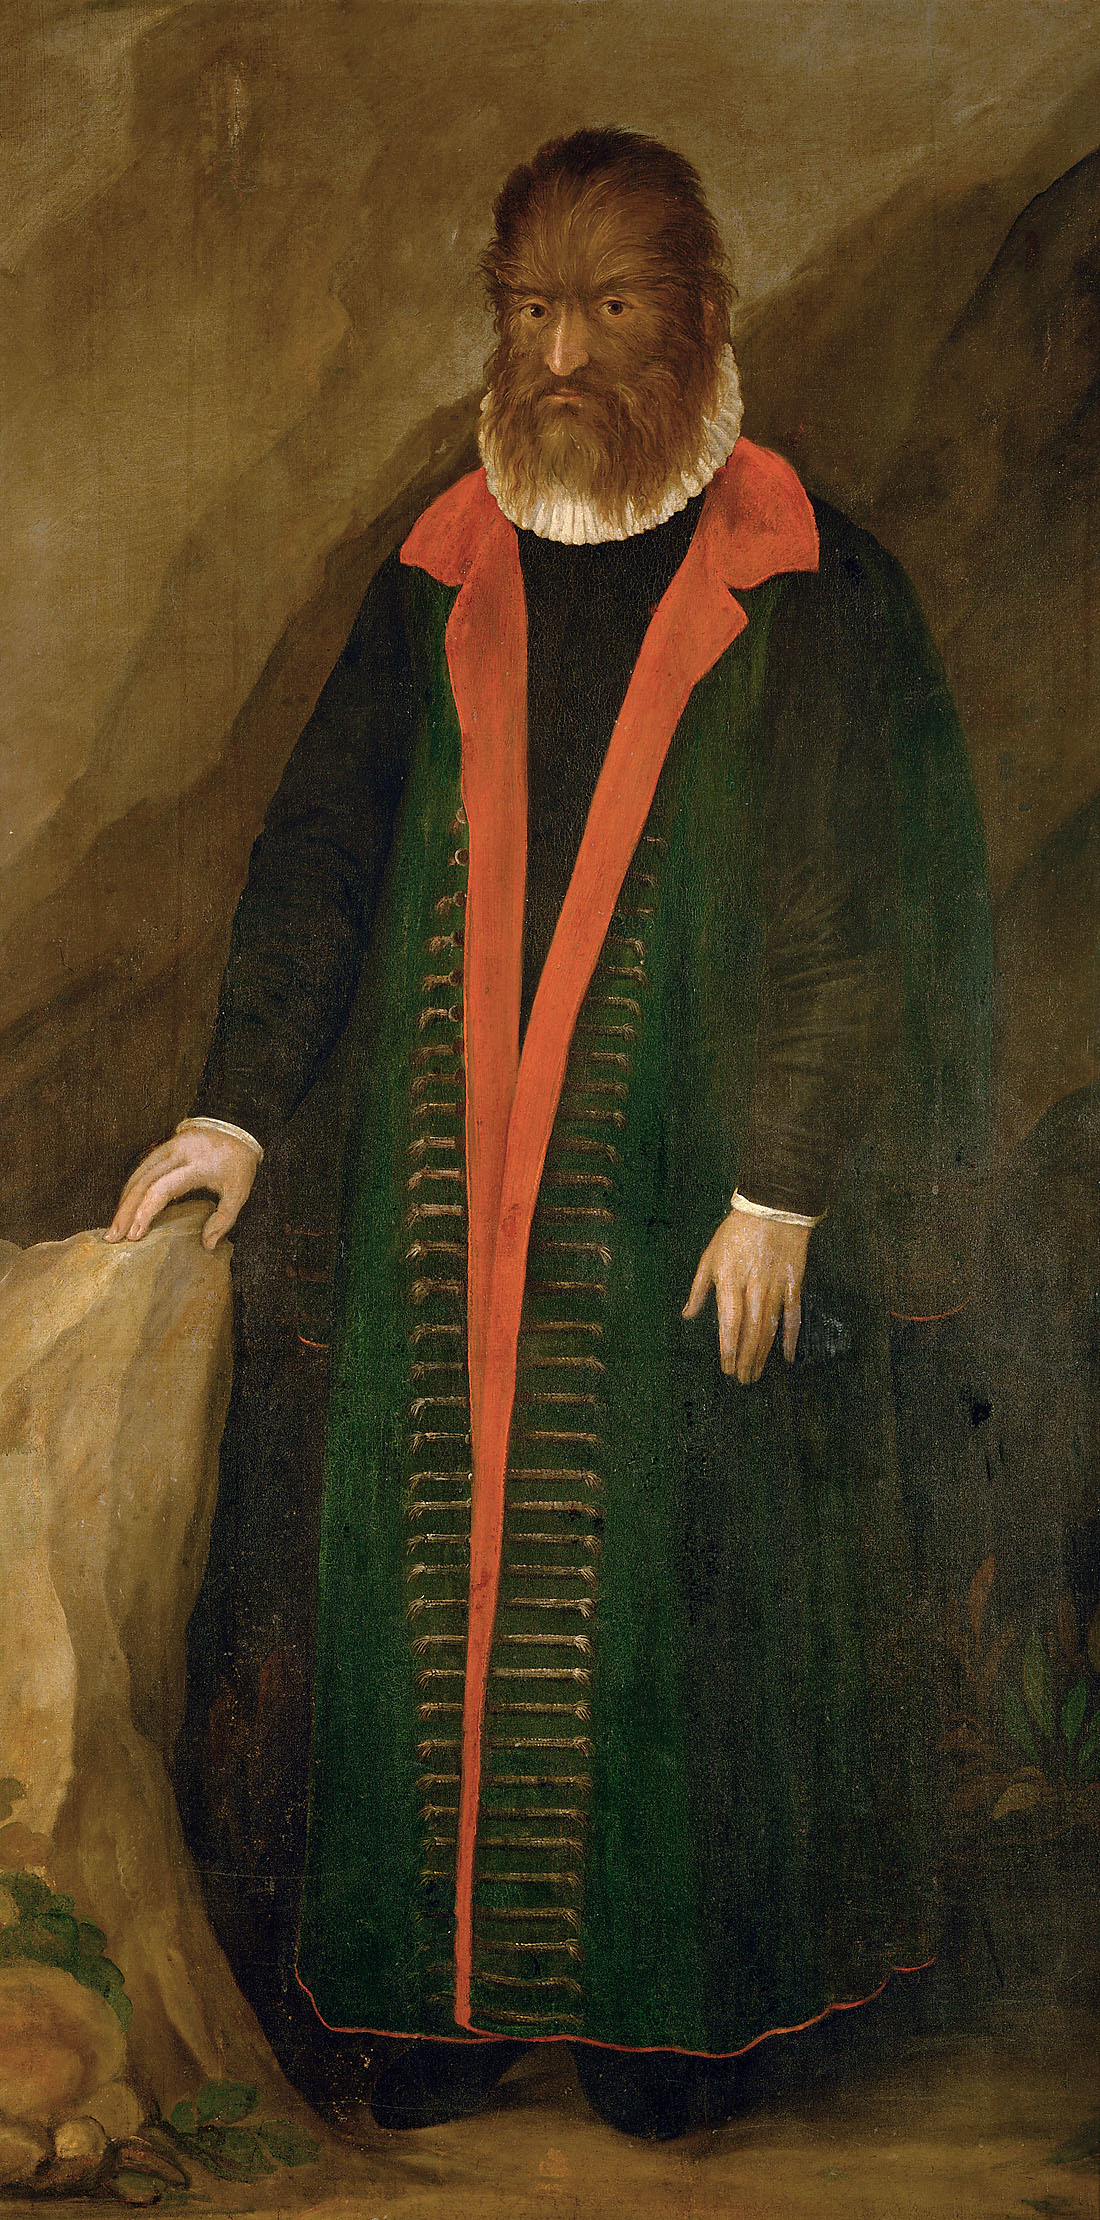 Omul Păros, Petrus Gonsalvus by Unknown Artist - 1580 